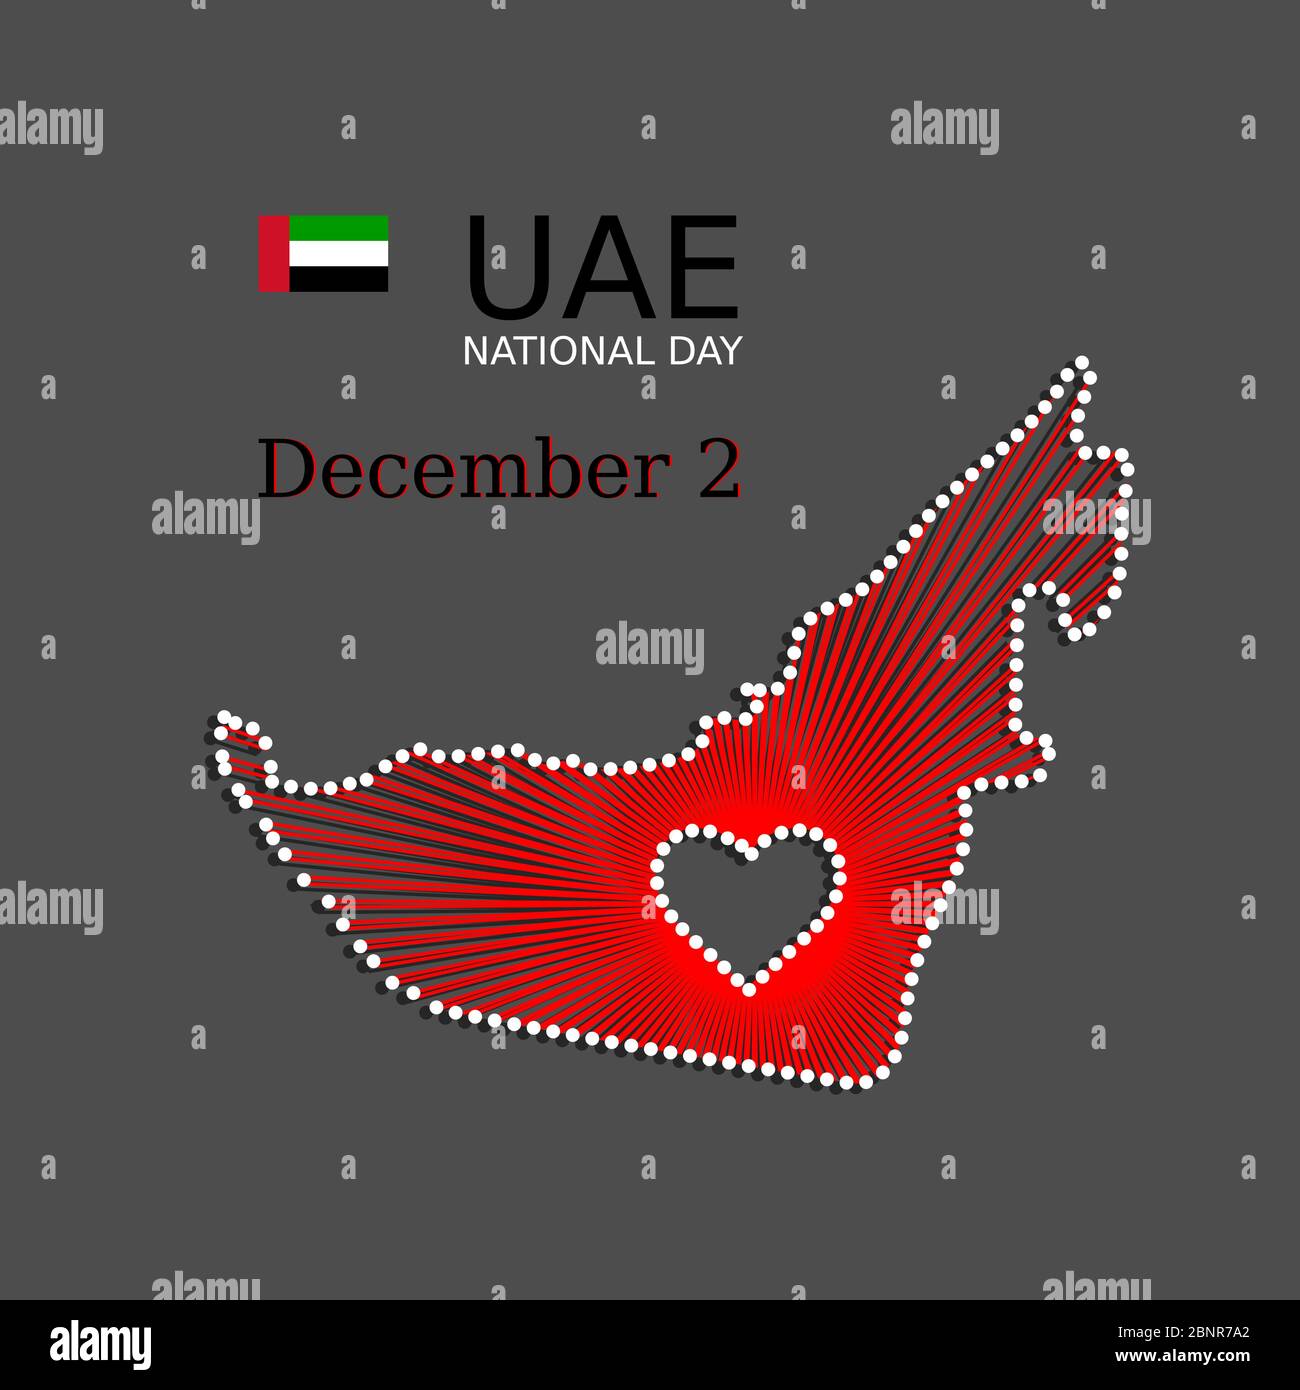 UAE National Day art banner, background, poster. Patriotic illustration of UAE United Arab Emirates unity with map, flag, heart Stock Vector